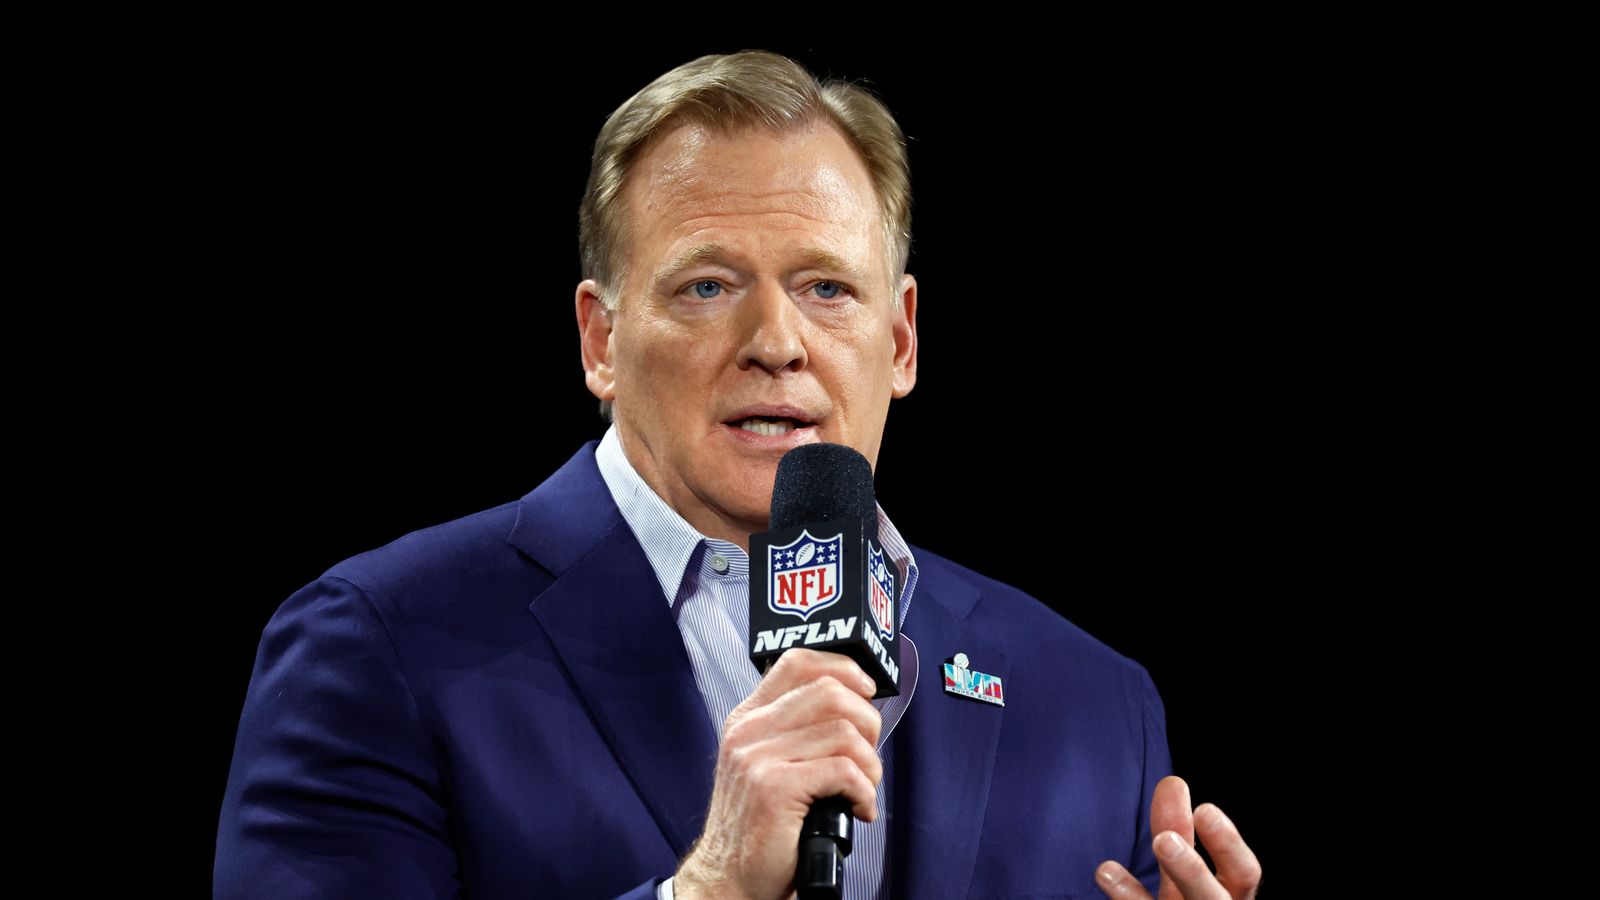 NFL Commissioner Roger Goodell receives three-year contract extension until March 2027